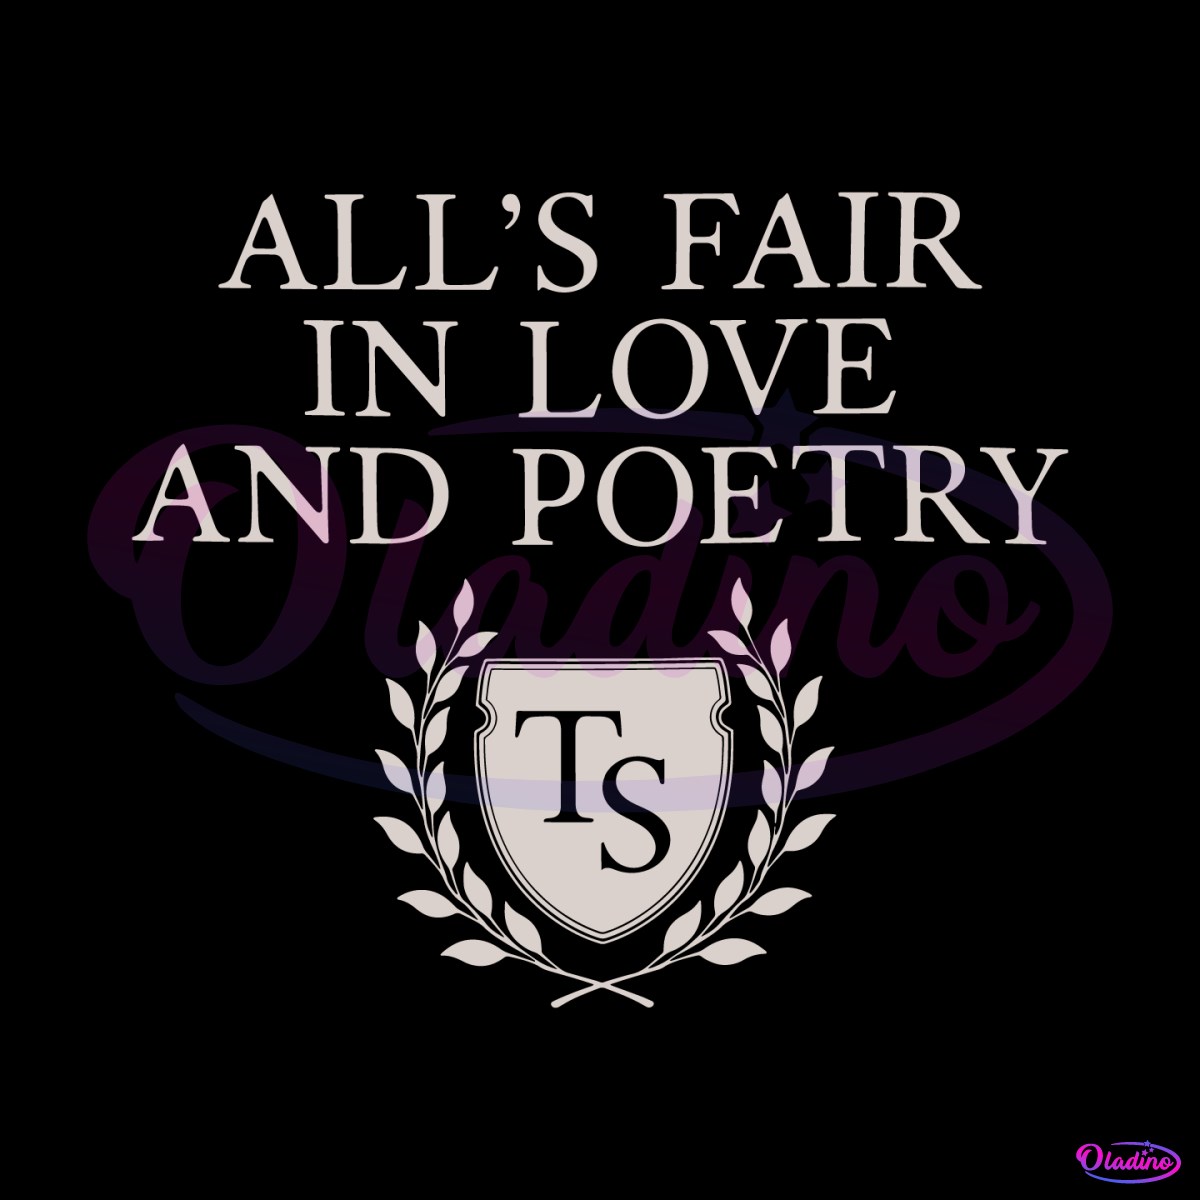 alls-fair-in-love-and-poetry-taylor-swift-album-svg